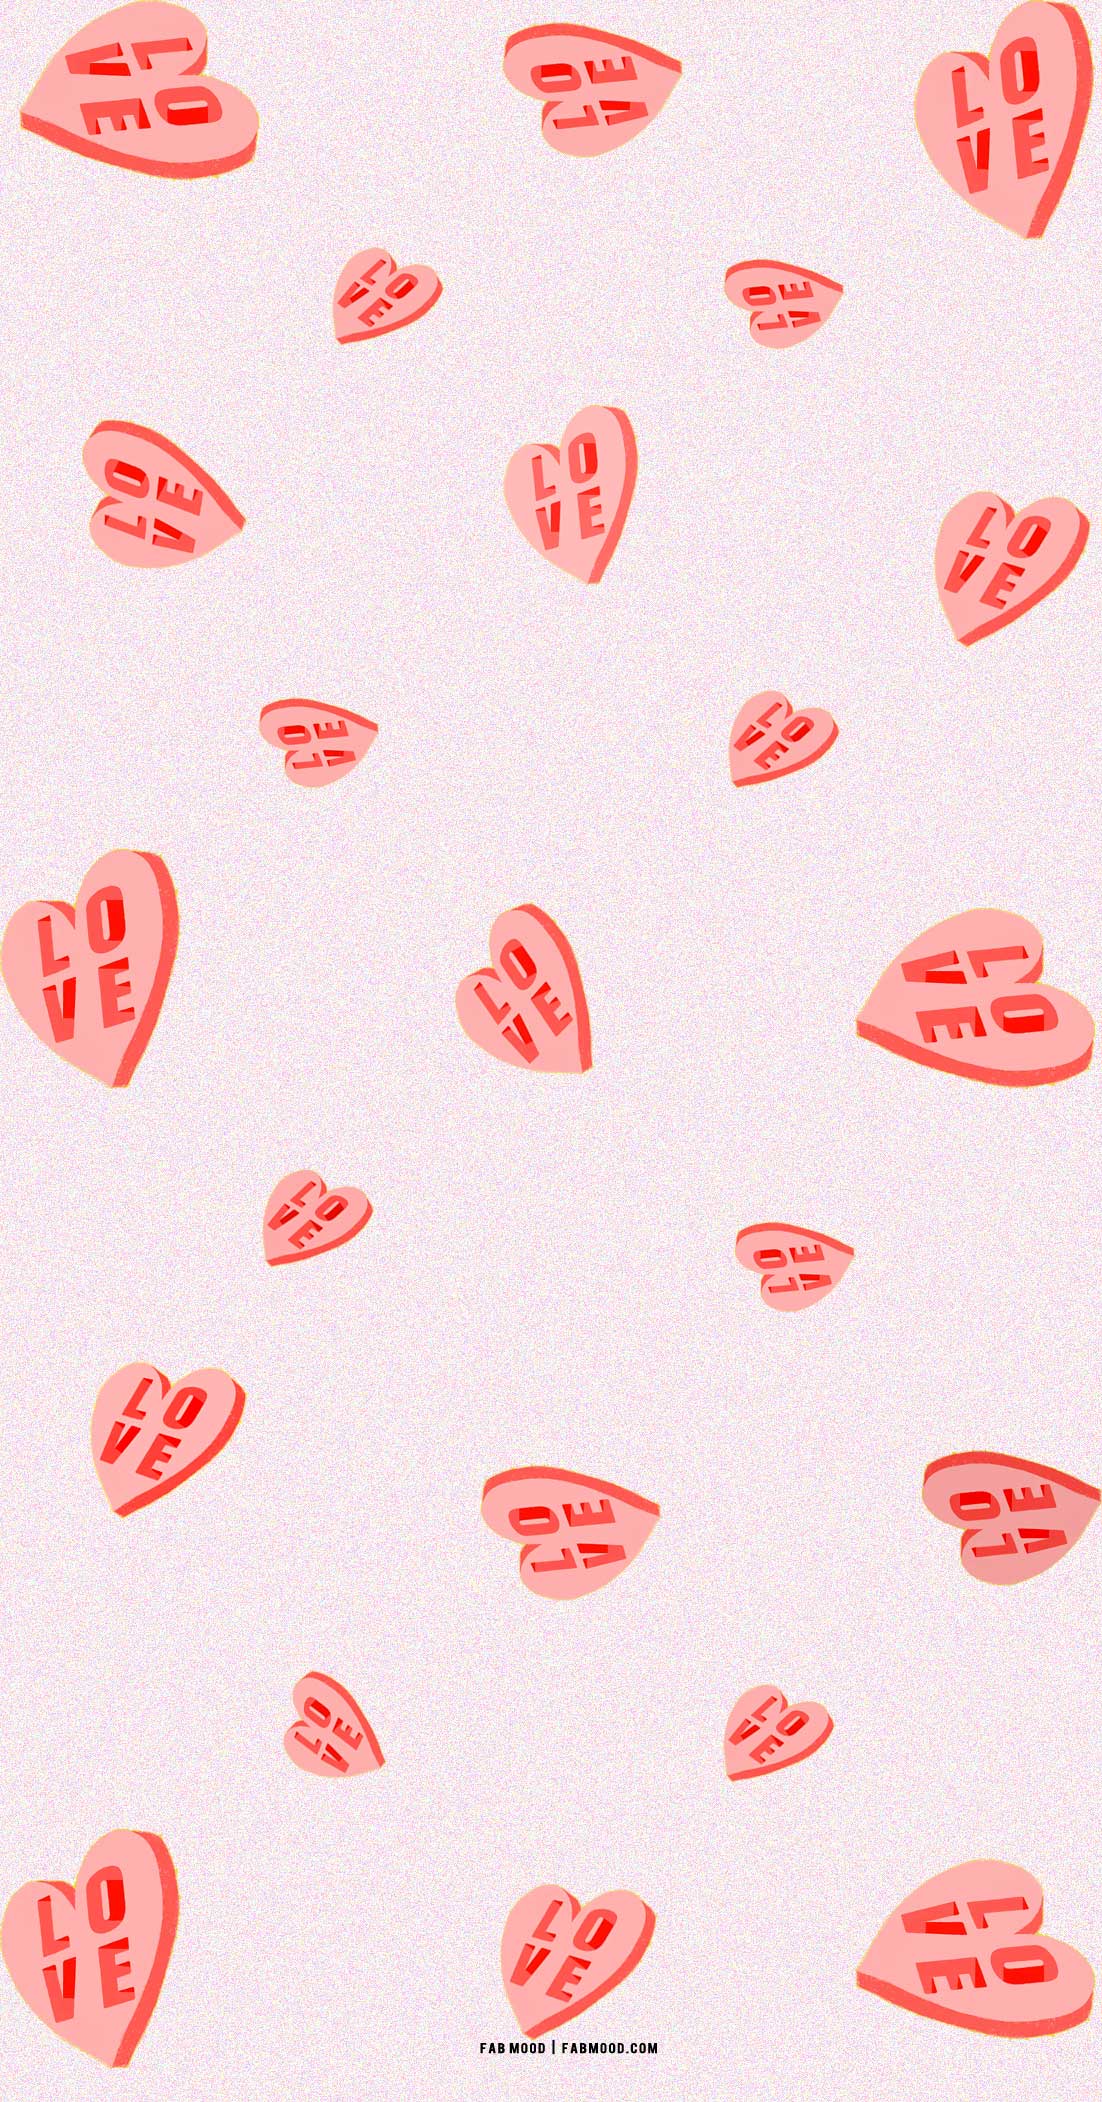 candy heart wallpaper phone, valentine's day wallpaper iphone, aesthetic valentine's day wallpaper, valentines day wallpaper, valentine's day wallpaper cute, valentines wallpaper ideas, valentines wallpaper iphone, valentines wallpaper phone, aesthetic valentine wallpaper